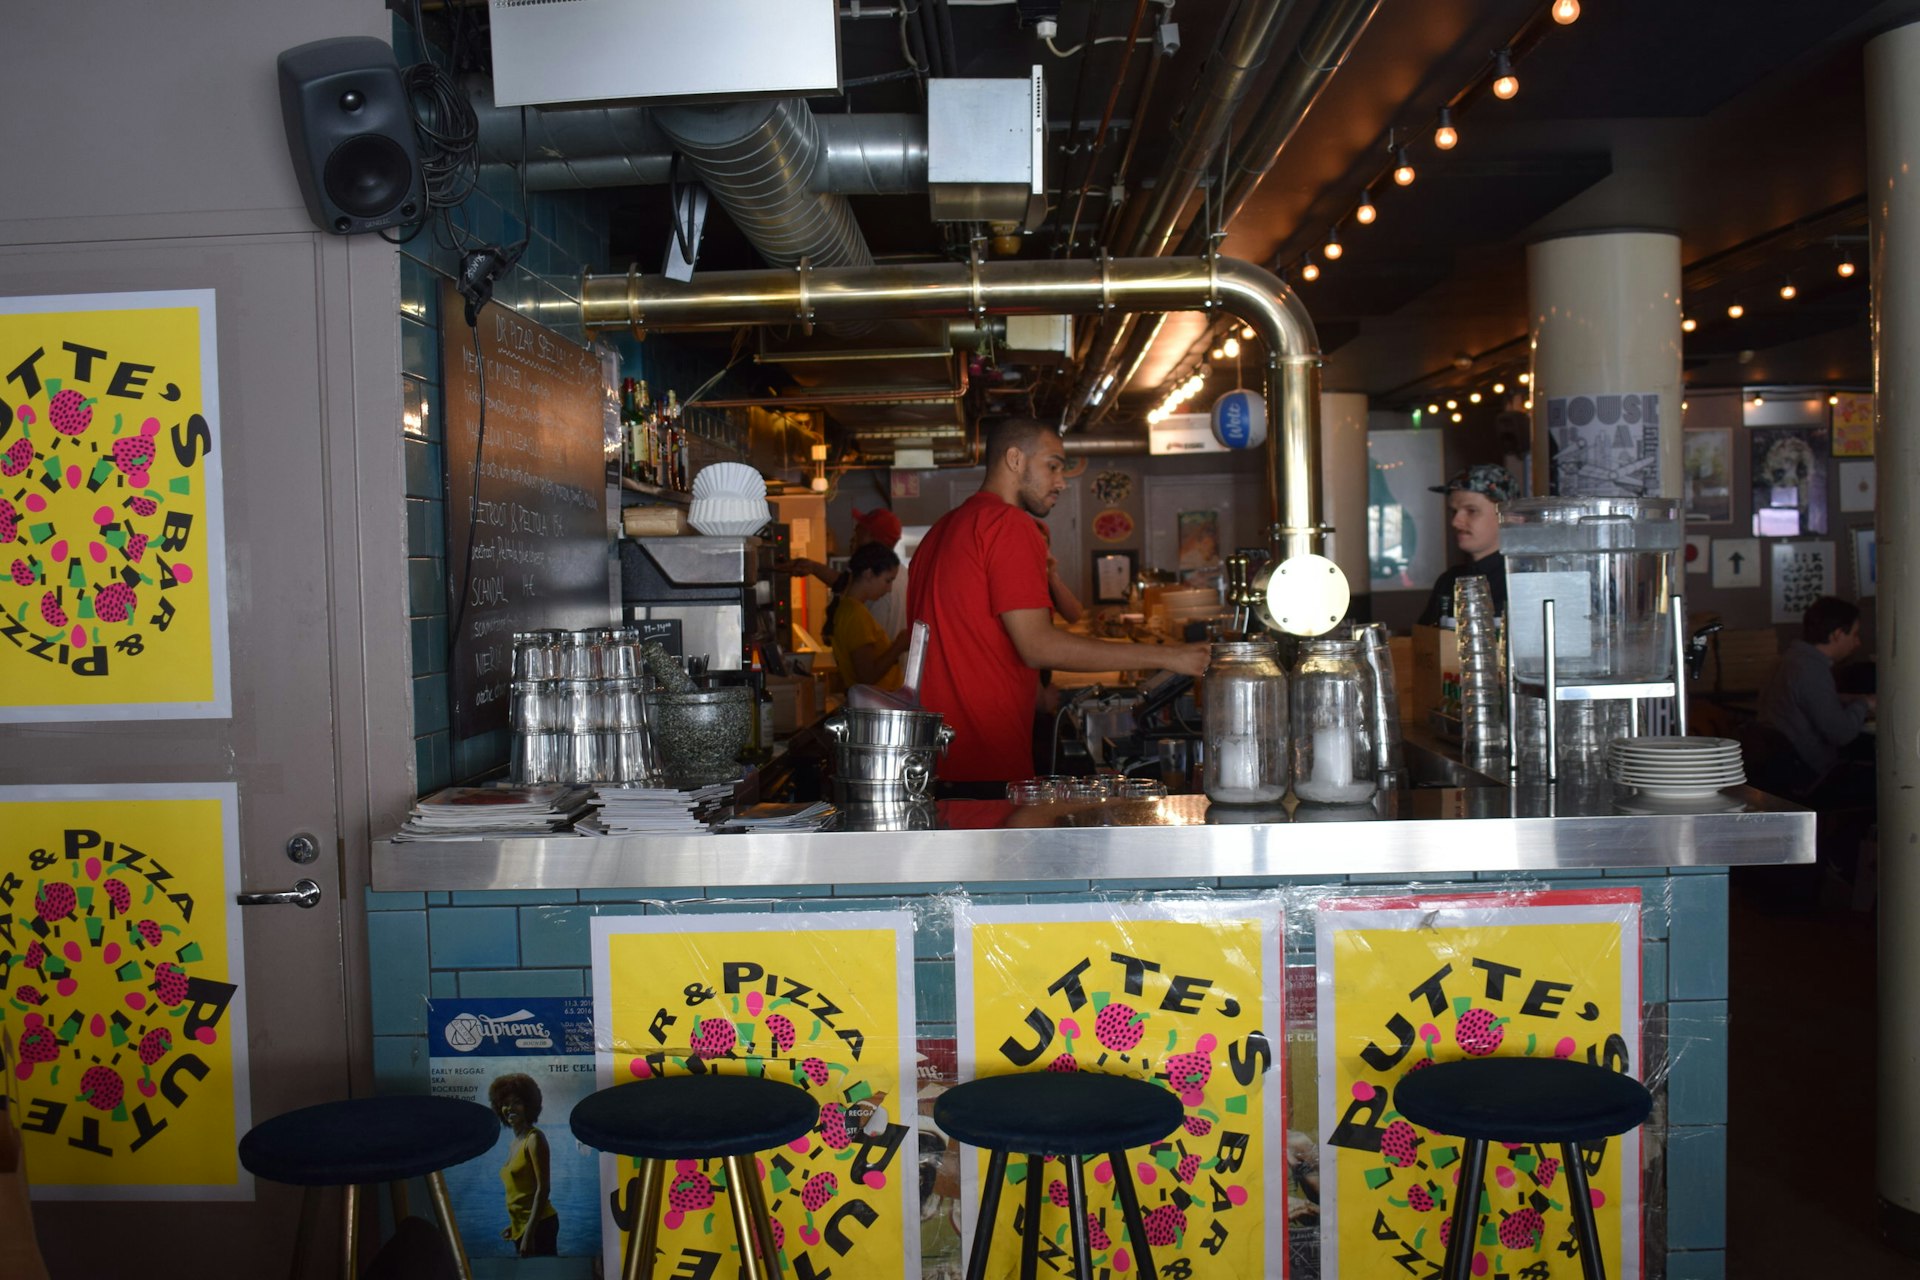 A member of staff working behinf the stainless steel counter at Putte's Pizza © Violetta Teetor